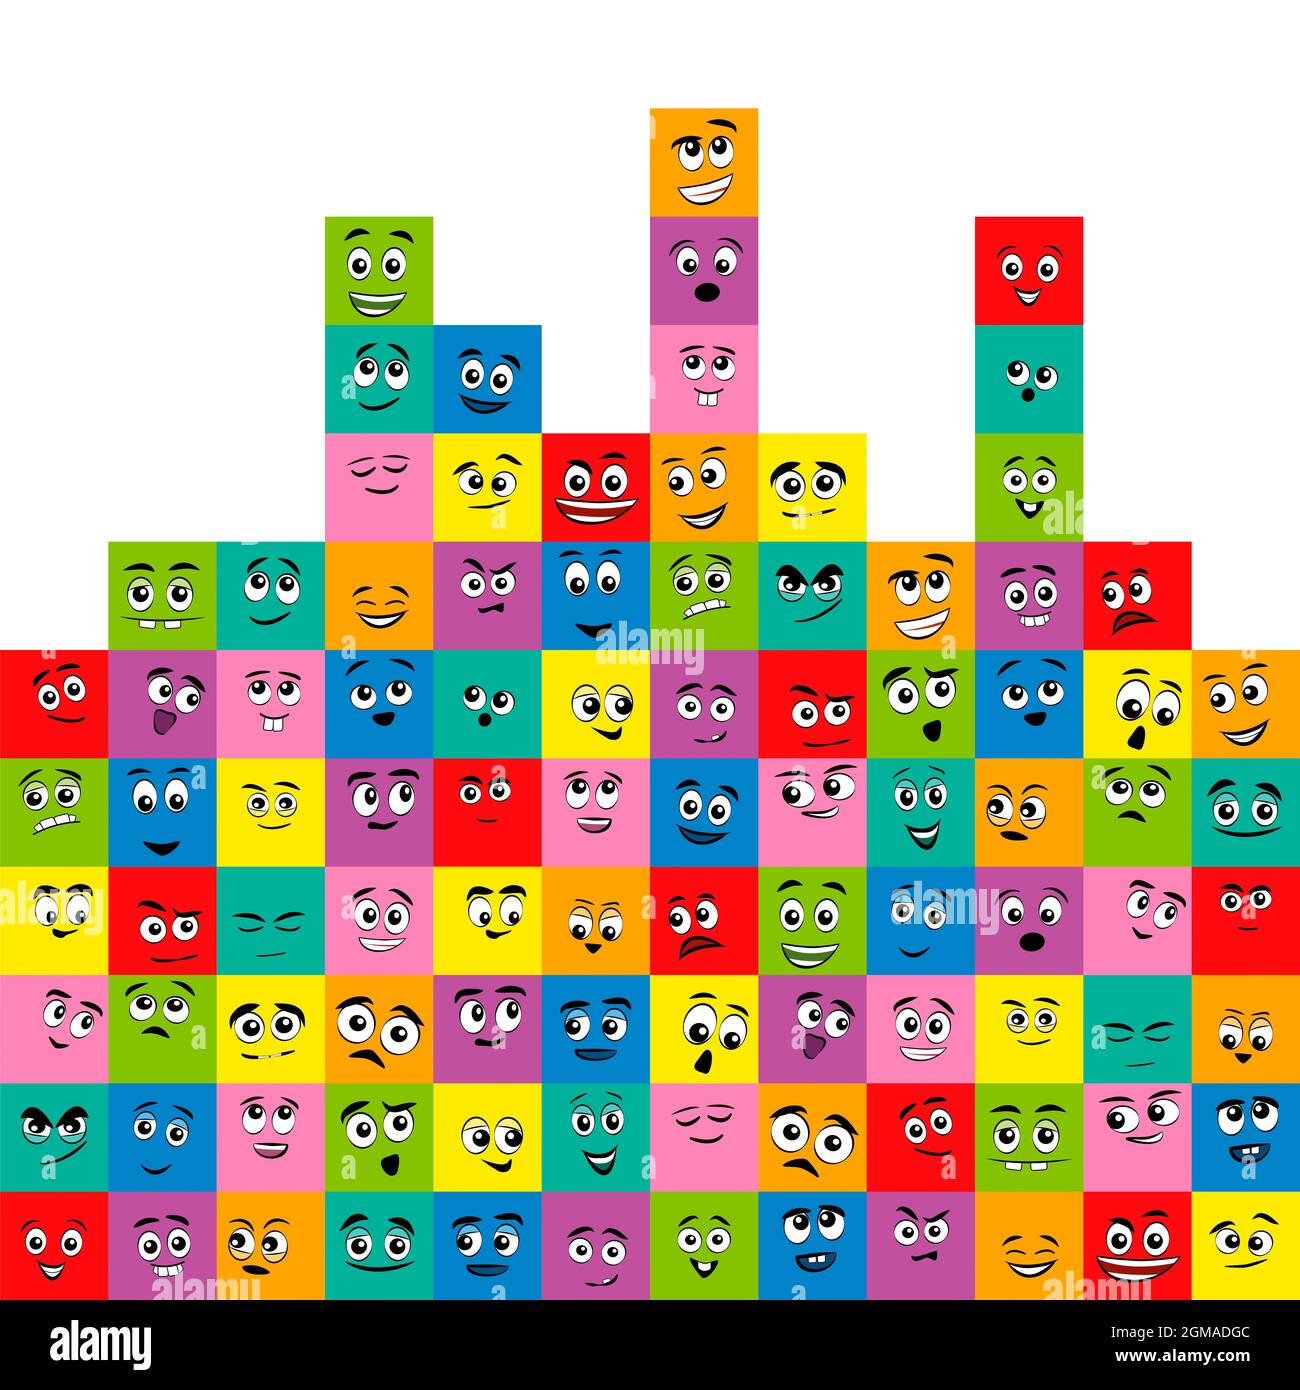 Colored squares with different comic faces - happy, funny, sad, grumpy, scared, friendly, curious. Find the same pairs with same colors and expression. Stock Photo